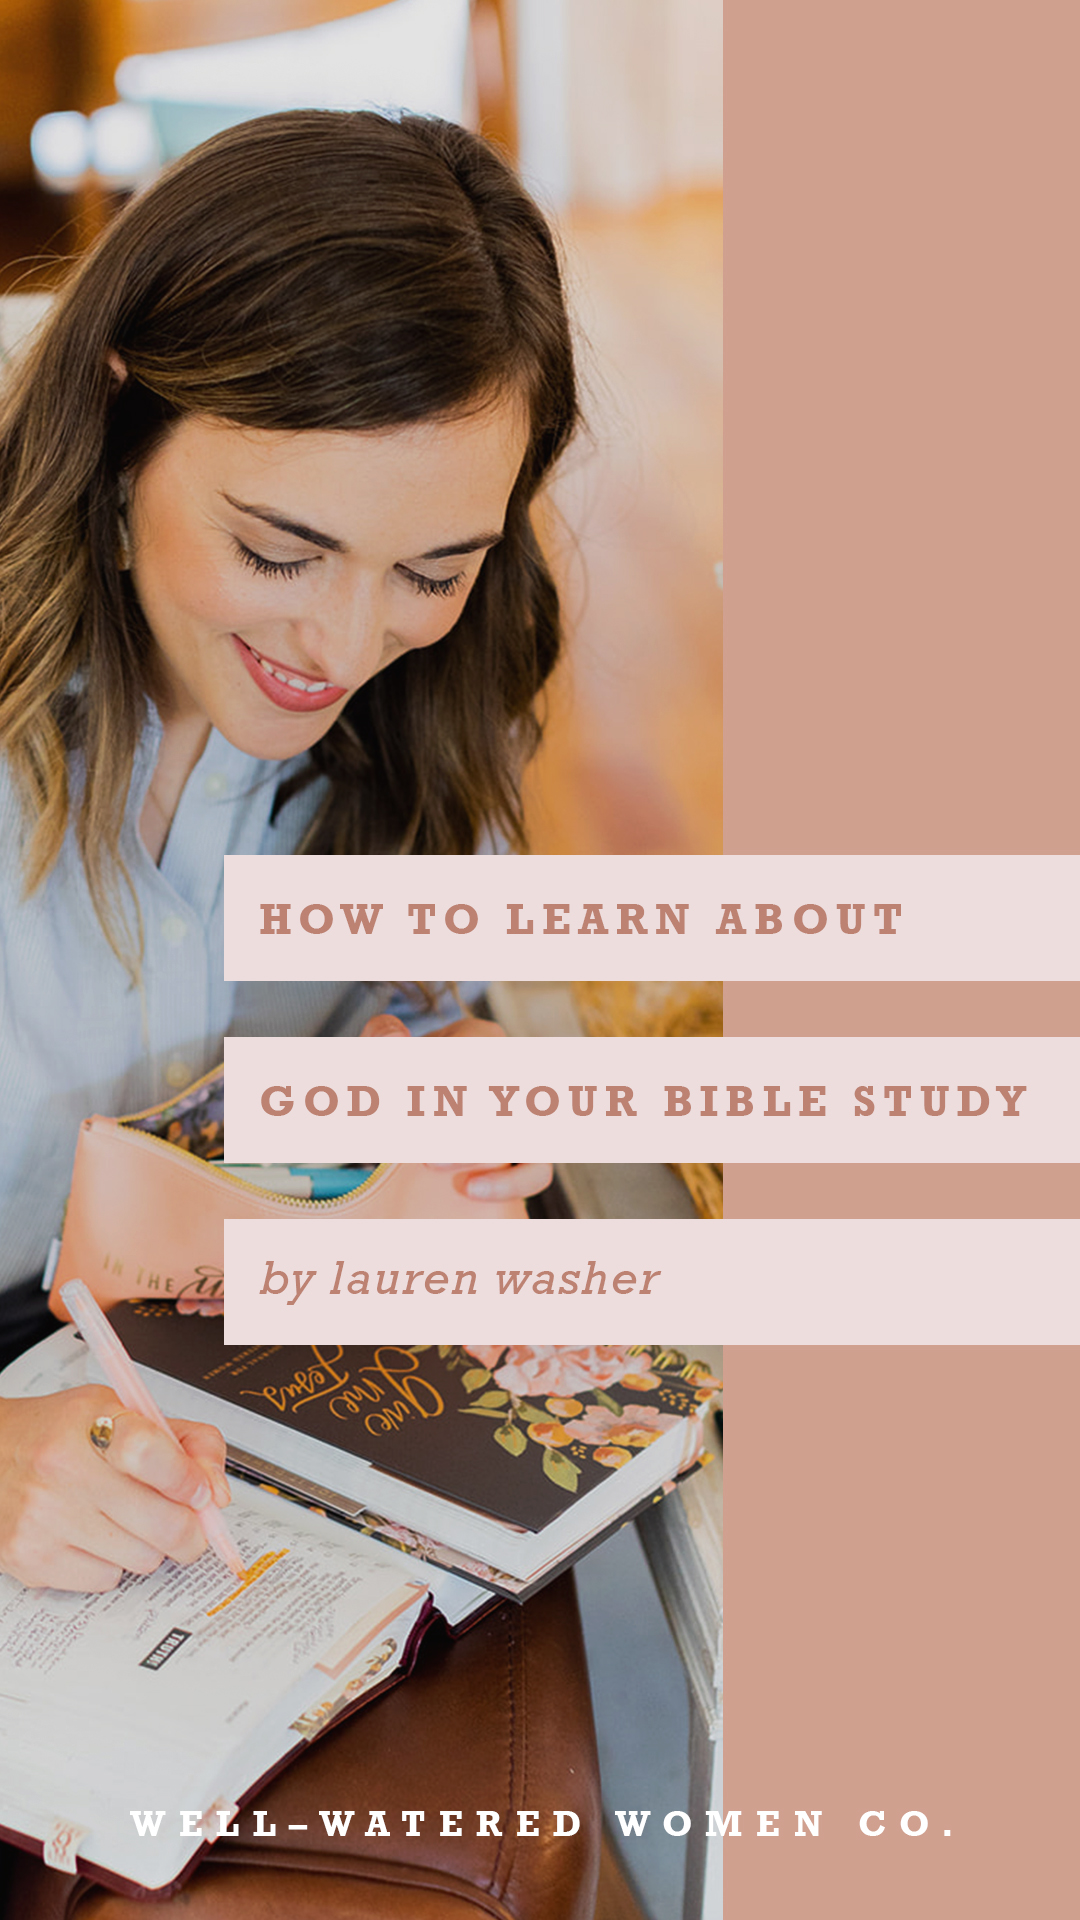 How to Learn About God in Your Bible Study – an Article by Well-Watered Women